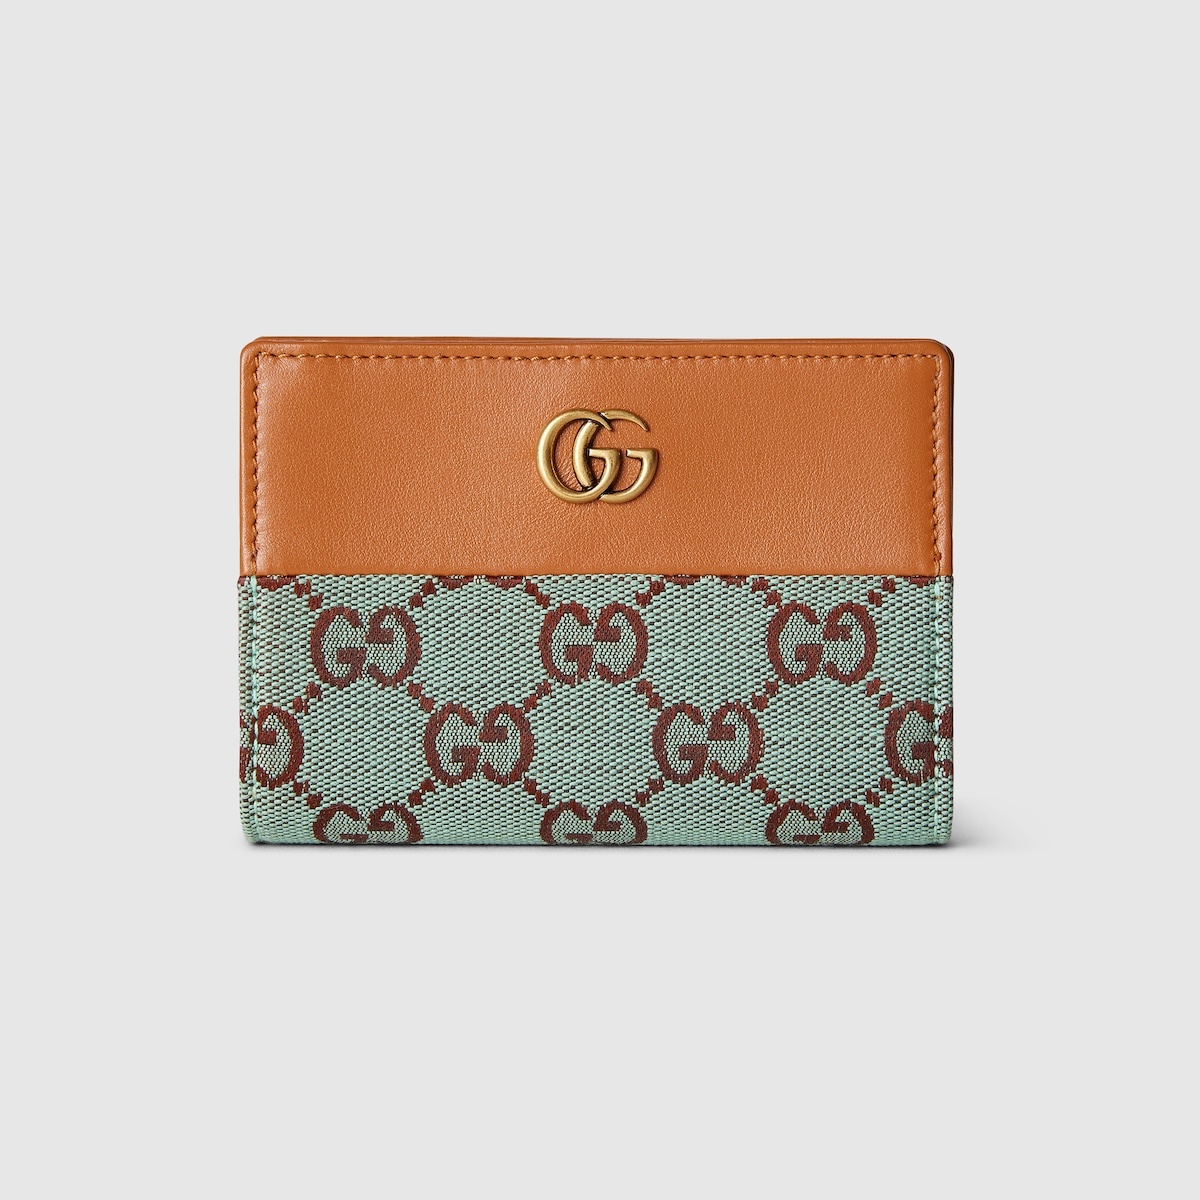 GG wallet with coin pocket - 1